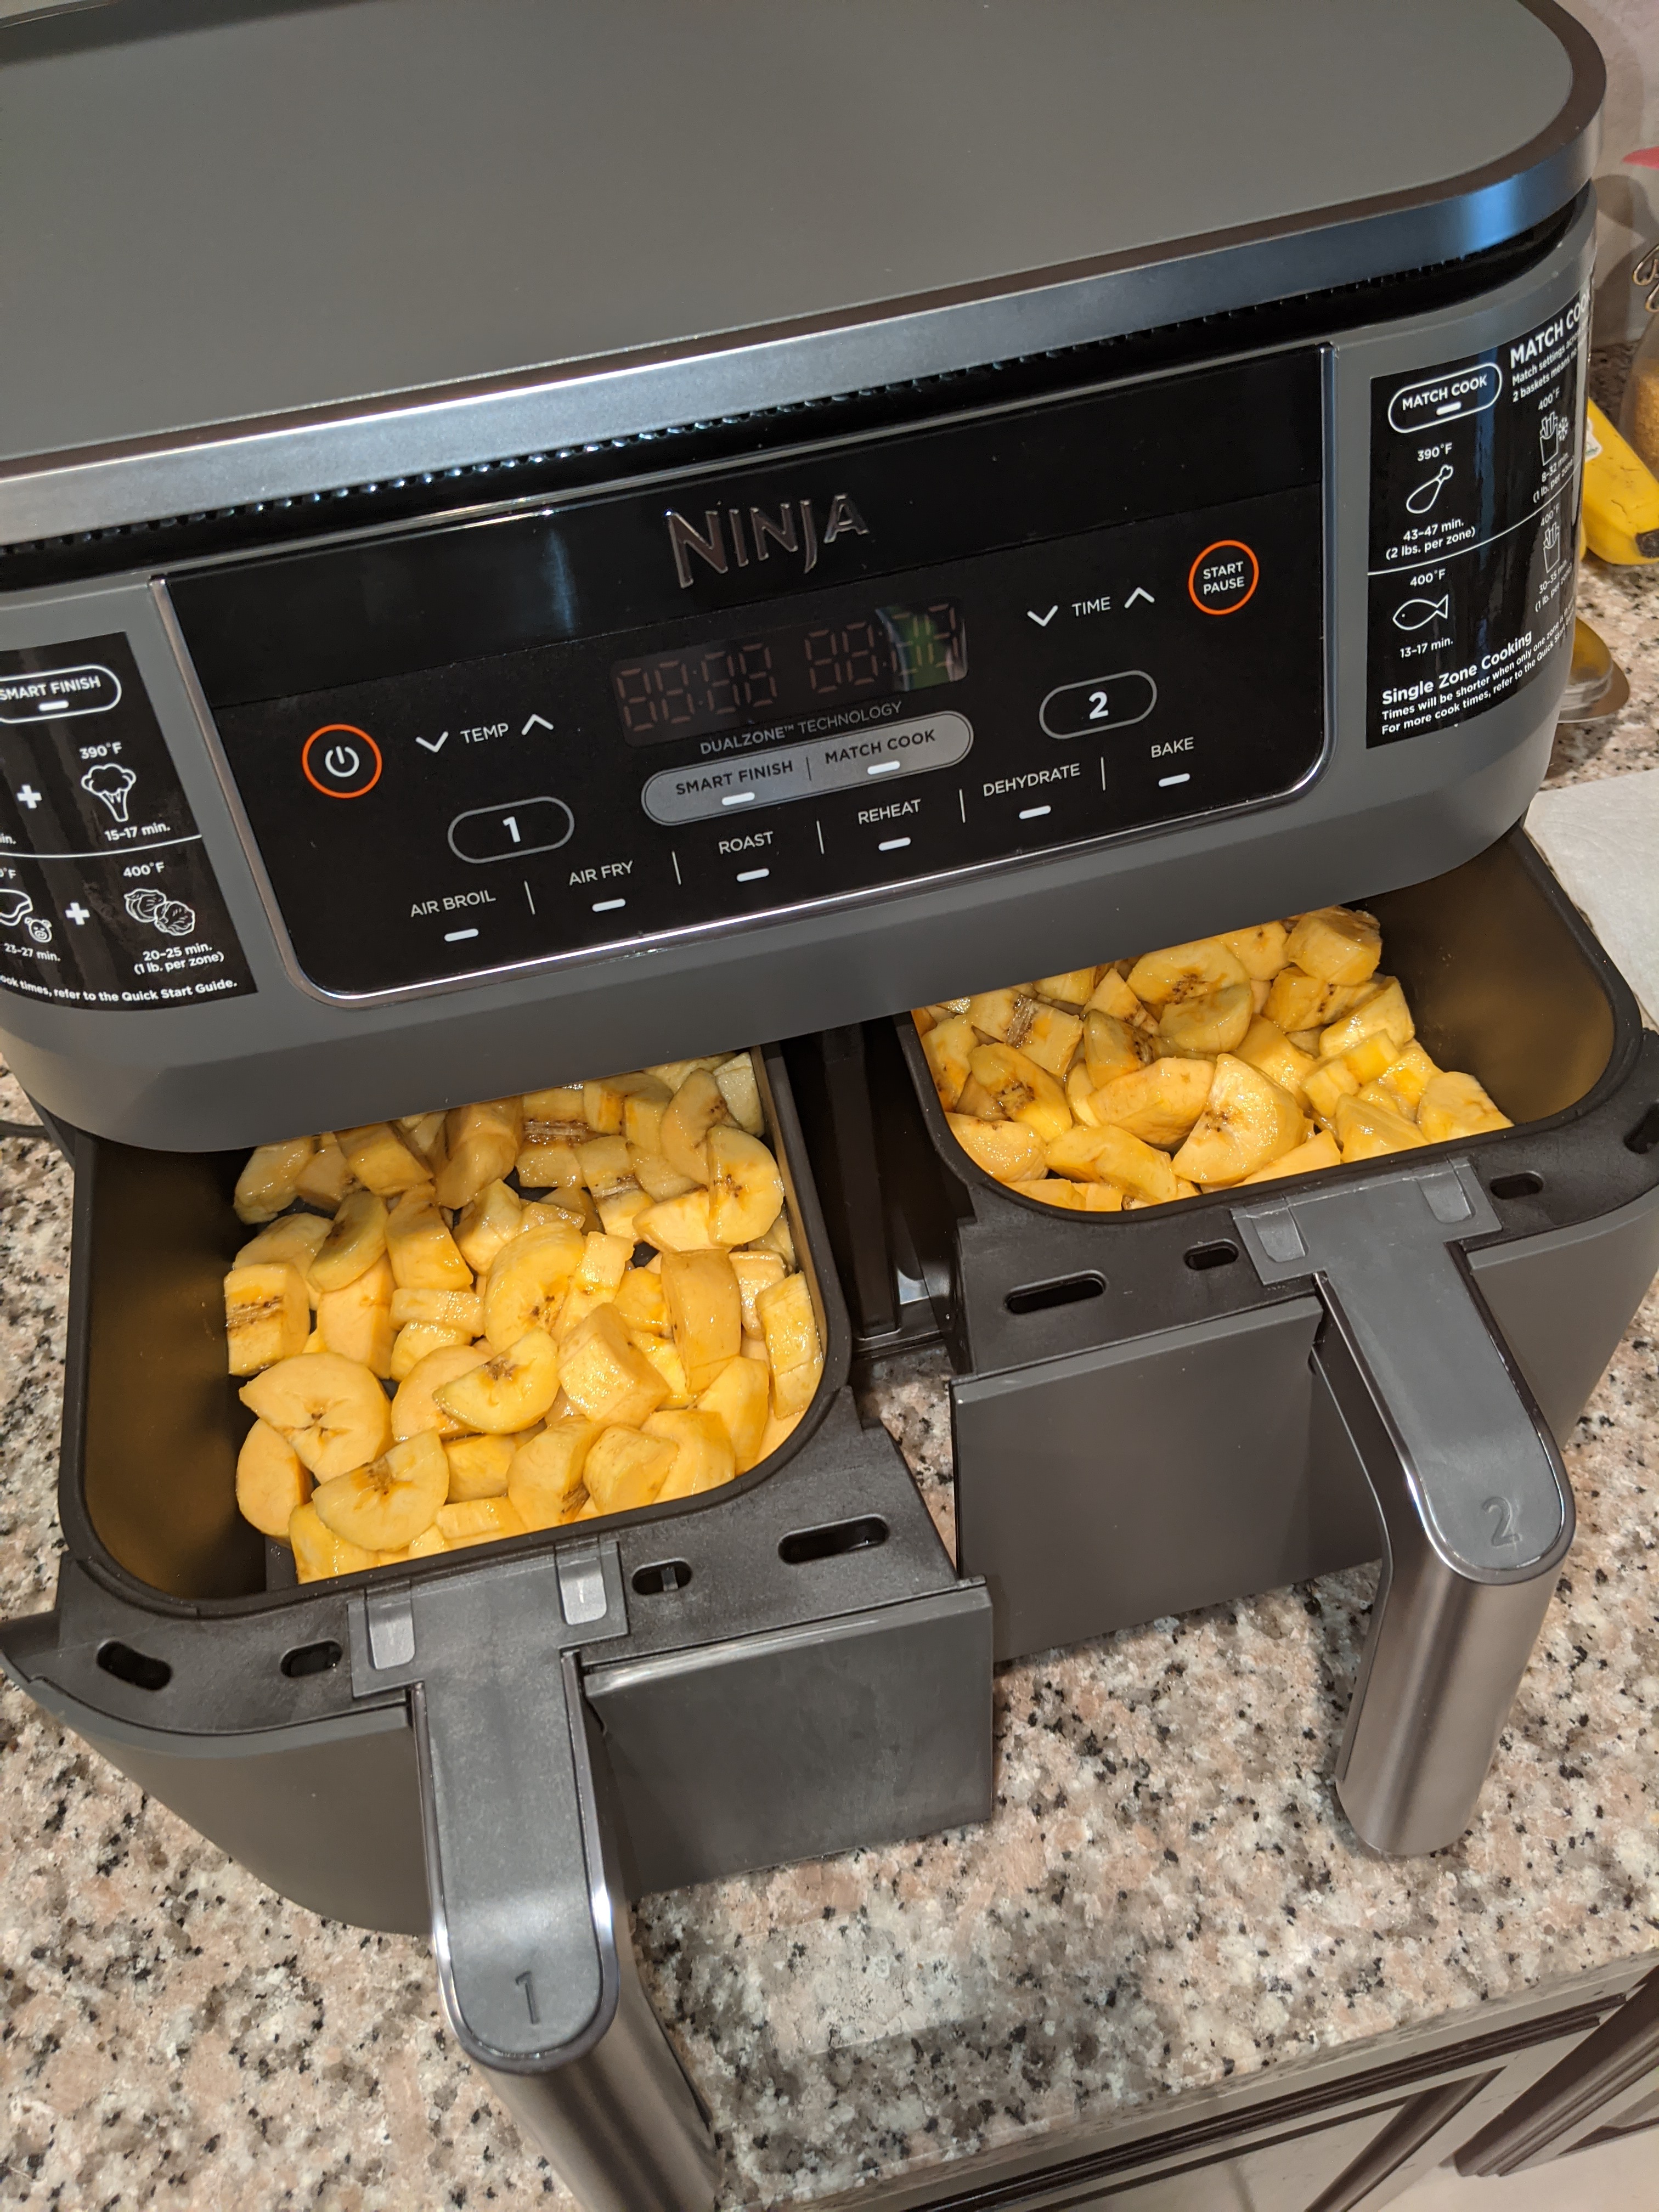 Ninja released a 2-basket air fryer so you can cook 2 dishes at once